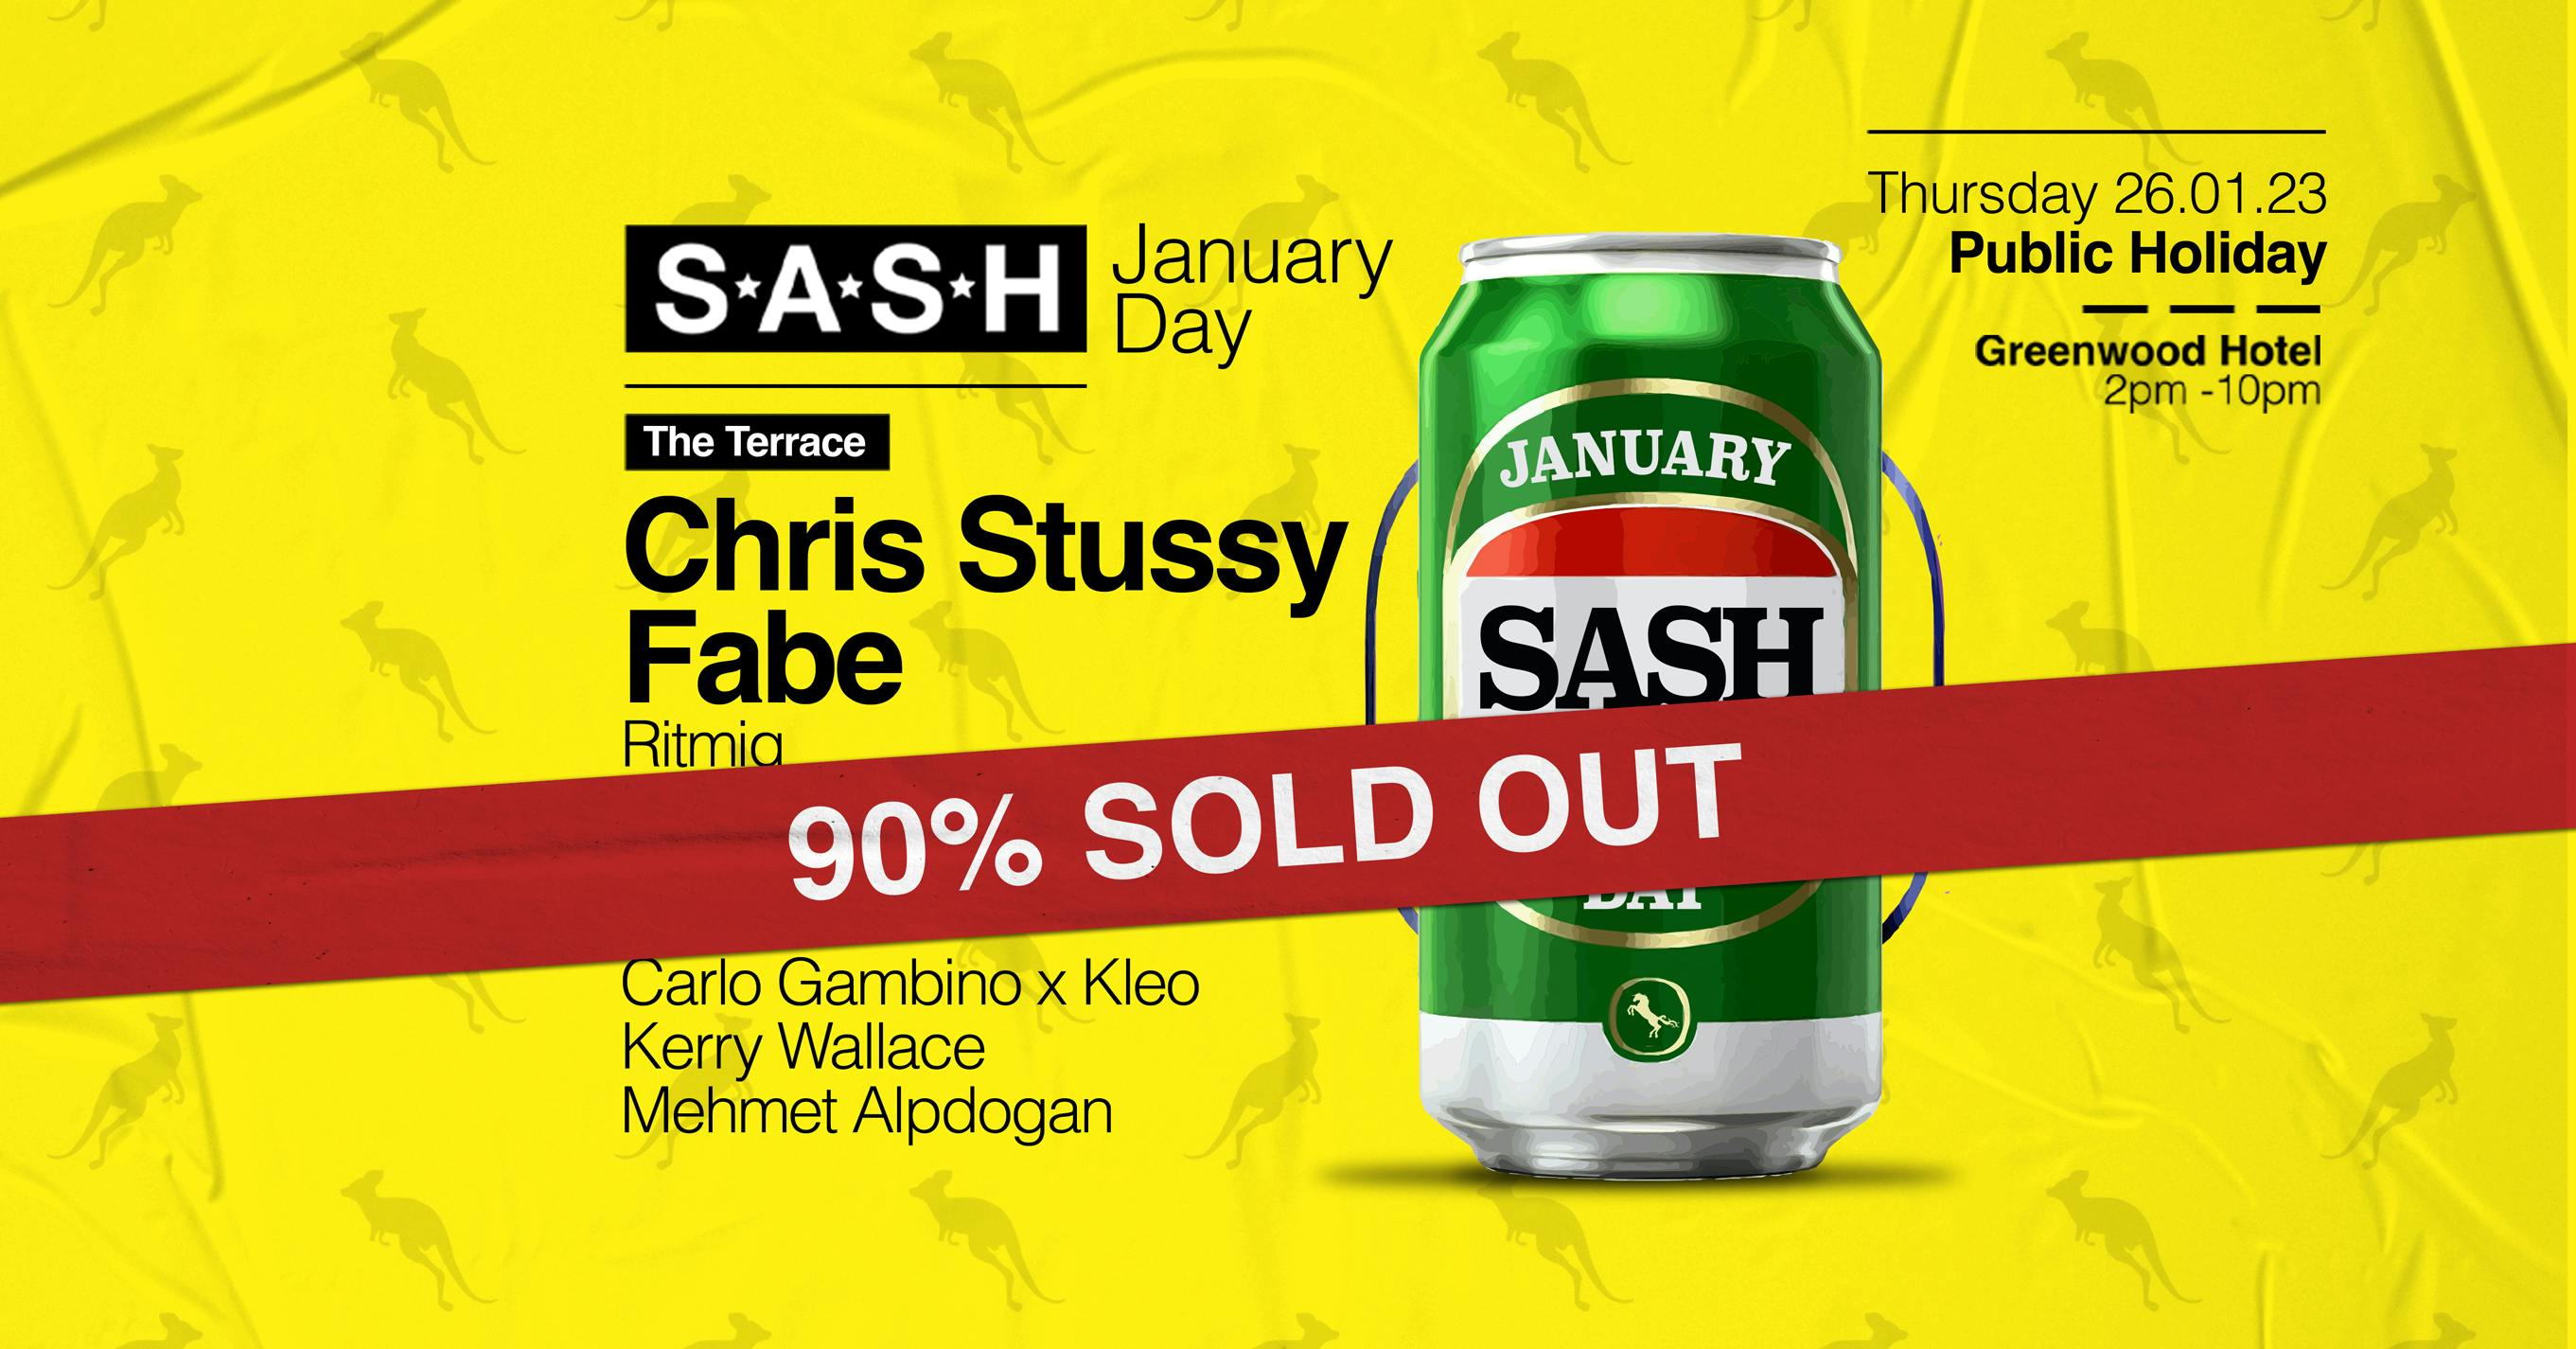 ★ S.A.S.H January Day ★ Chris Stussy ★ Fabe ★ 26th January ★